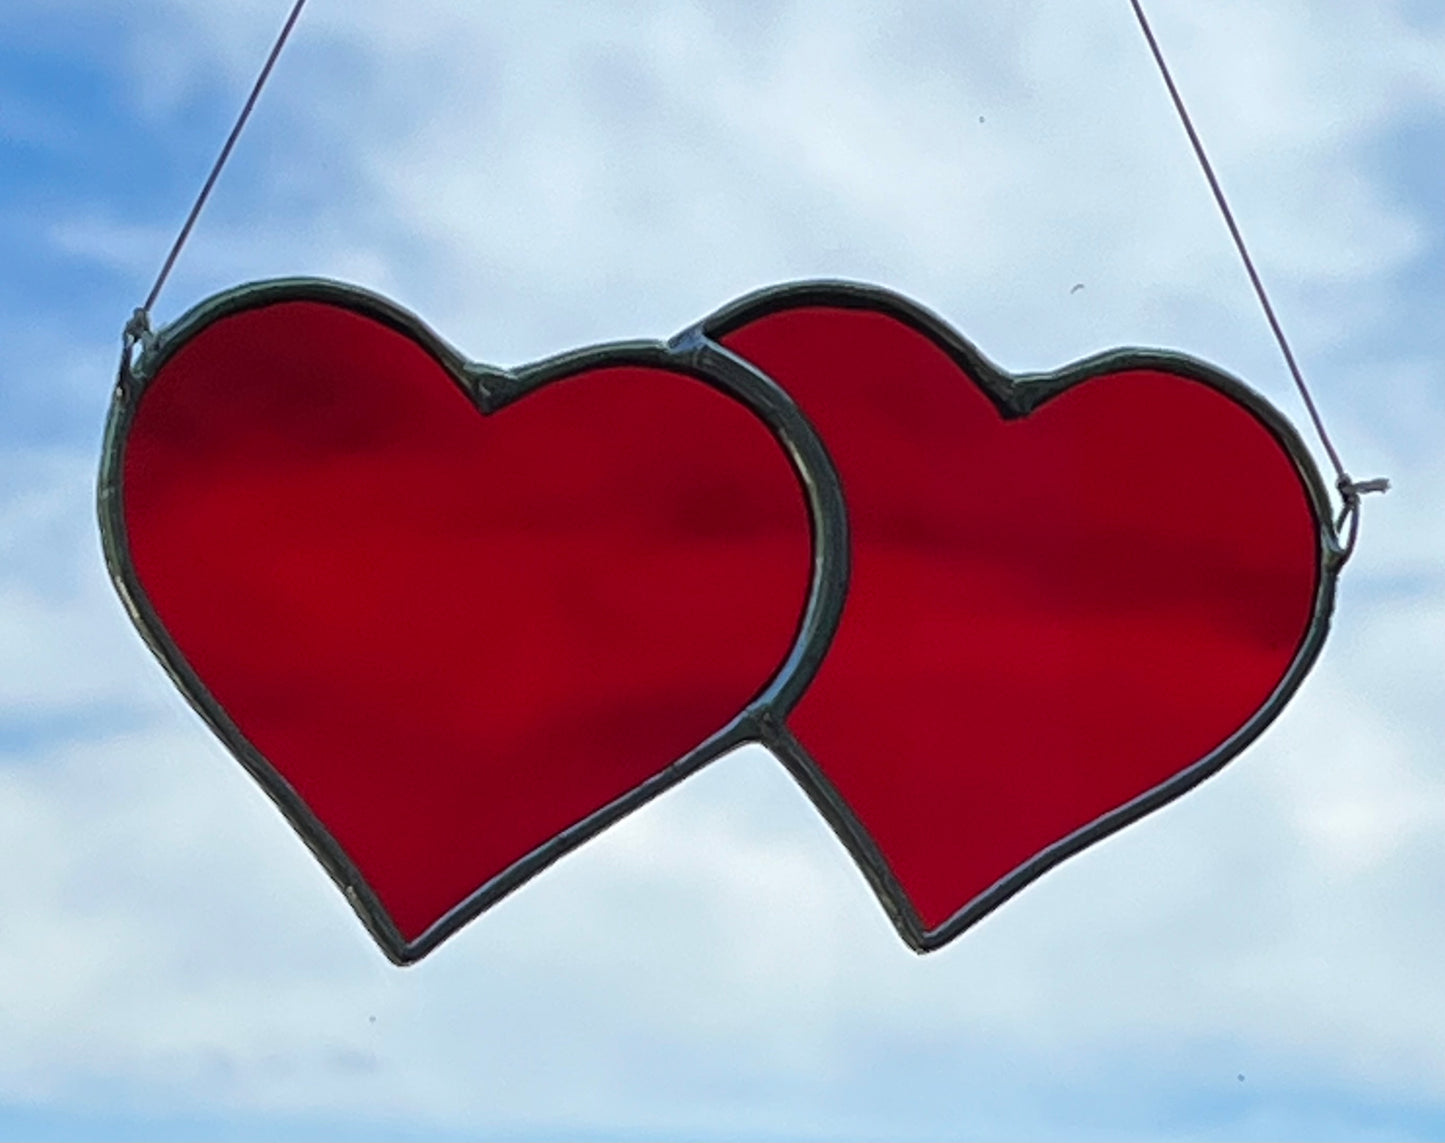 A suncatcher of red stained glass hearts joined together with a blue sky background.